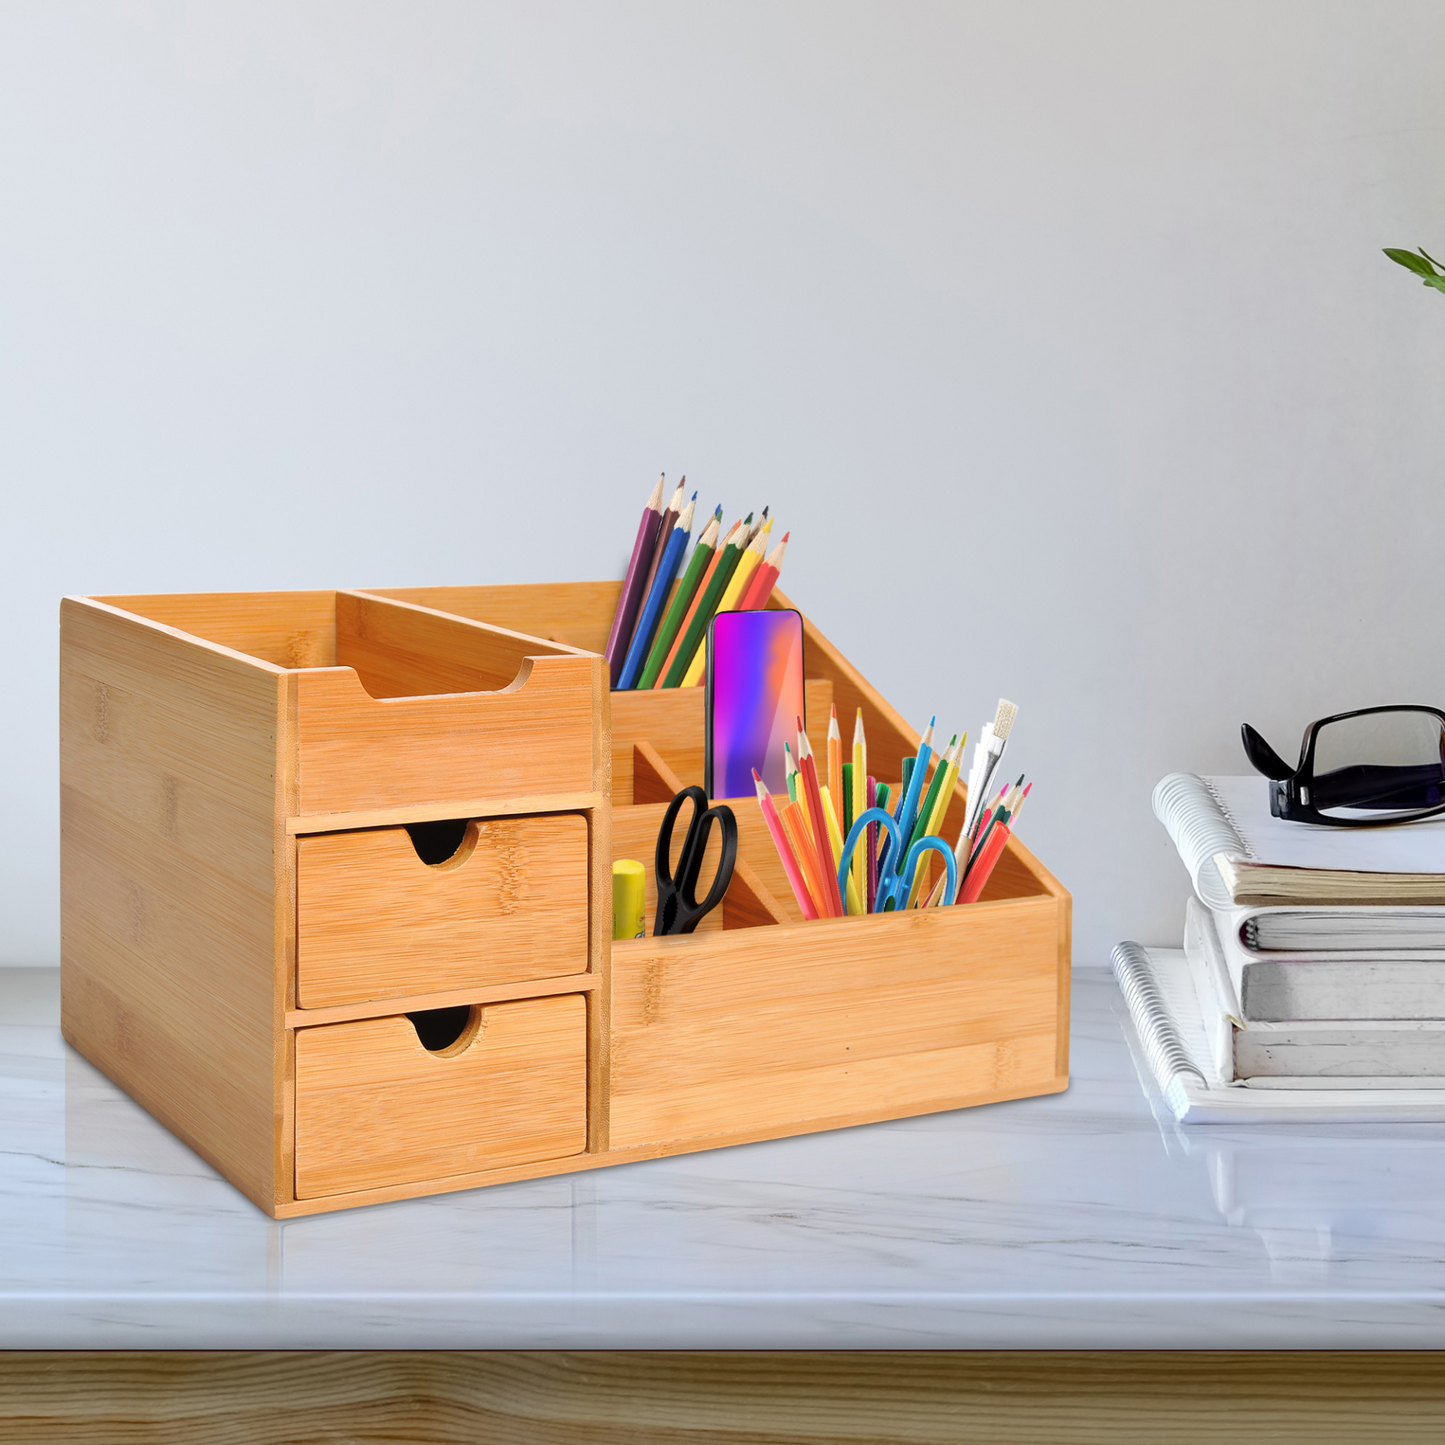 HOMCOM Organiser Holder Multi-Function Storage Caddy Drawers Home Office Stationary Supplies 7 Storage Compartments and 2 Drawers Natural Bamboo